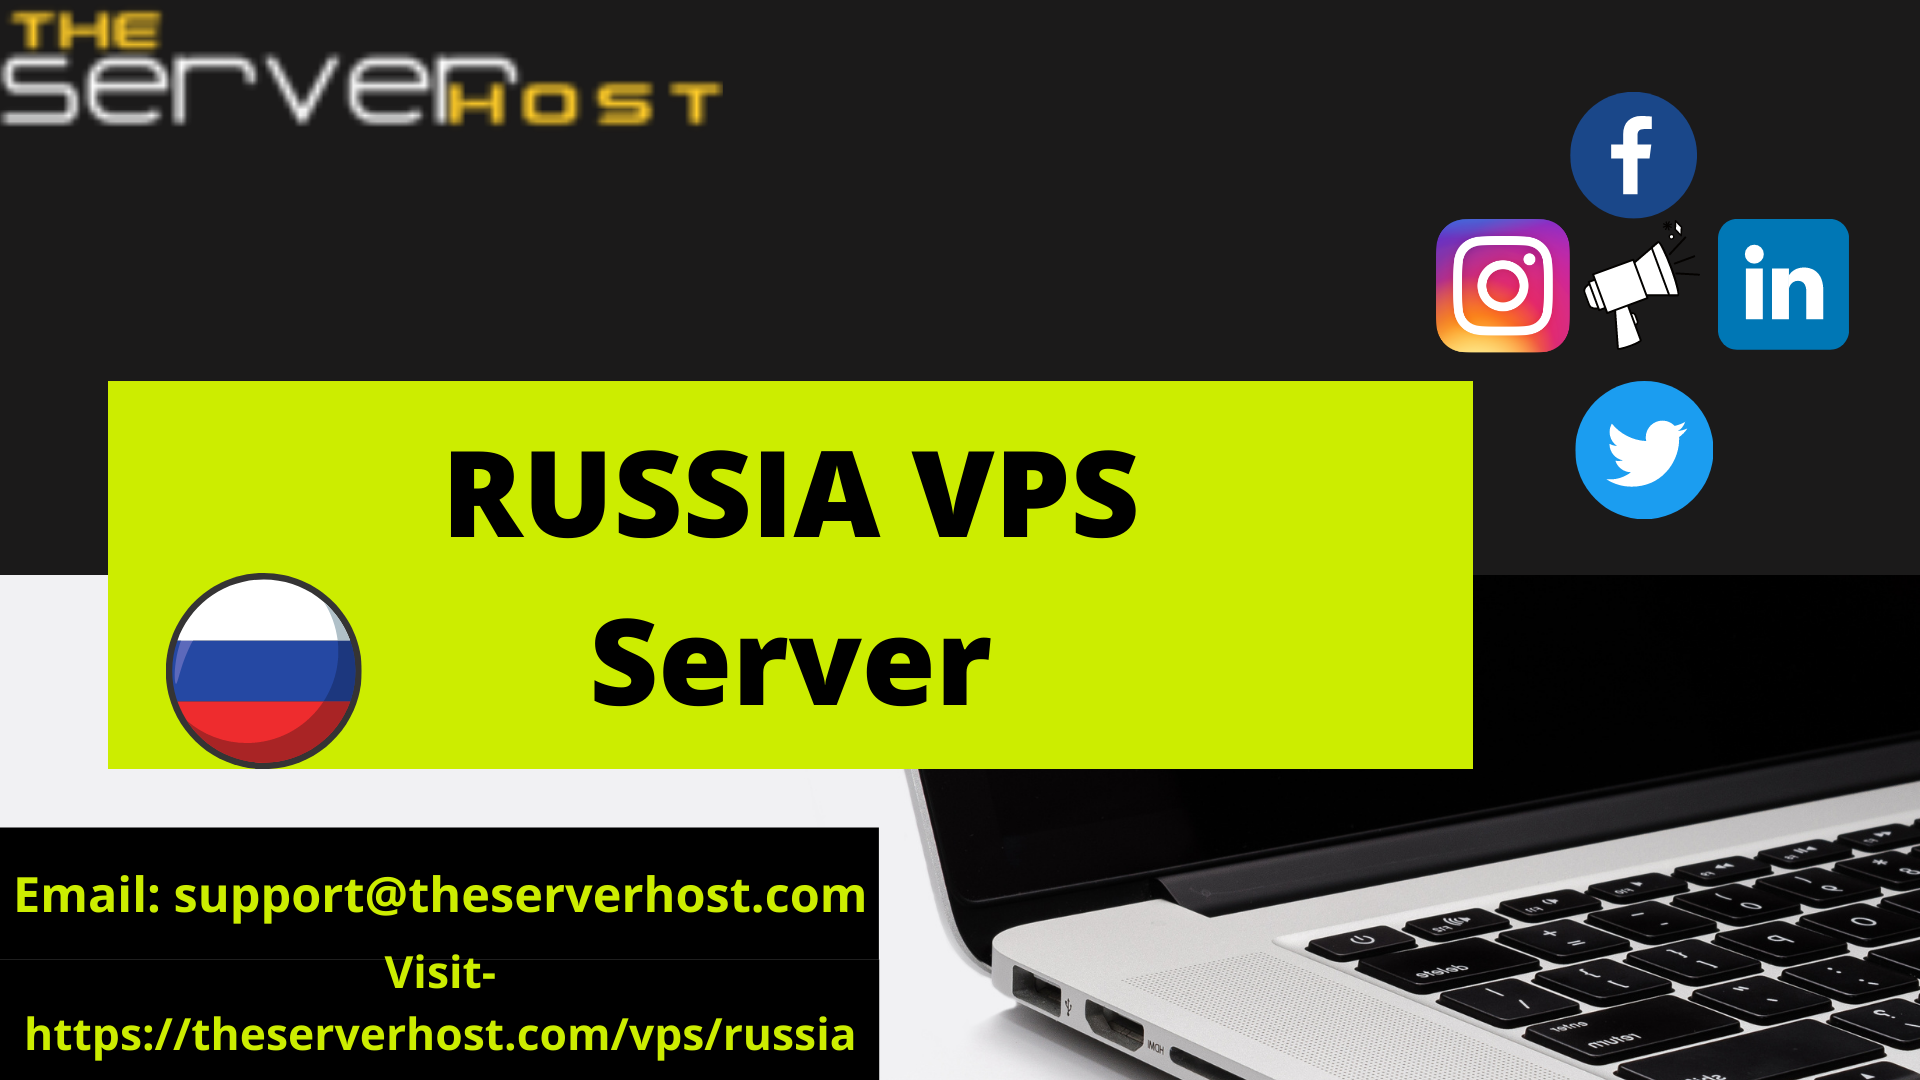 TheServerHost Russia, Moscow Dedicated and VPS Server offering Clean and dedicated IP with no spamRATS record for Transactional Emails